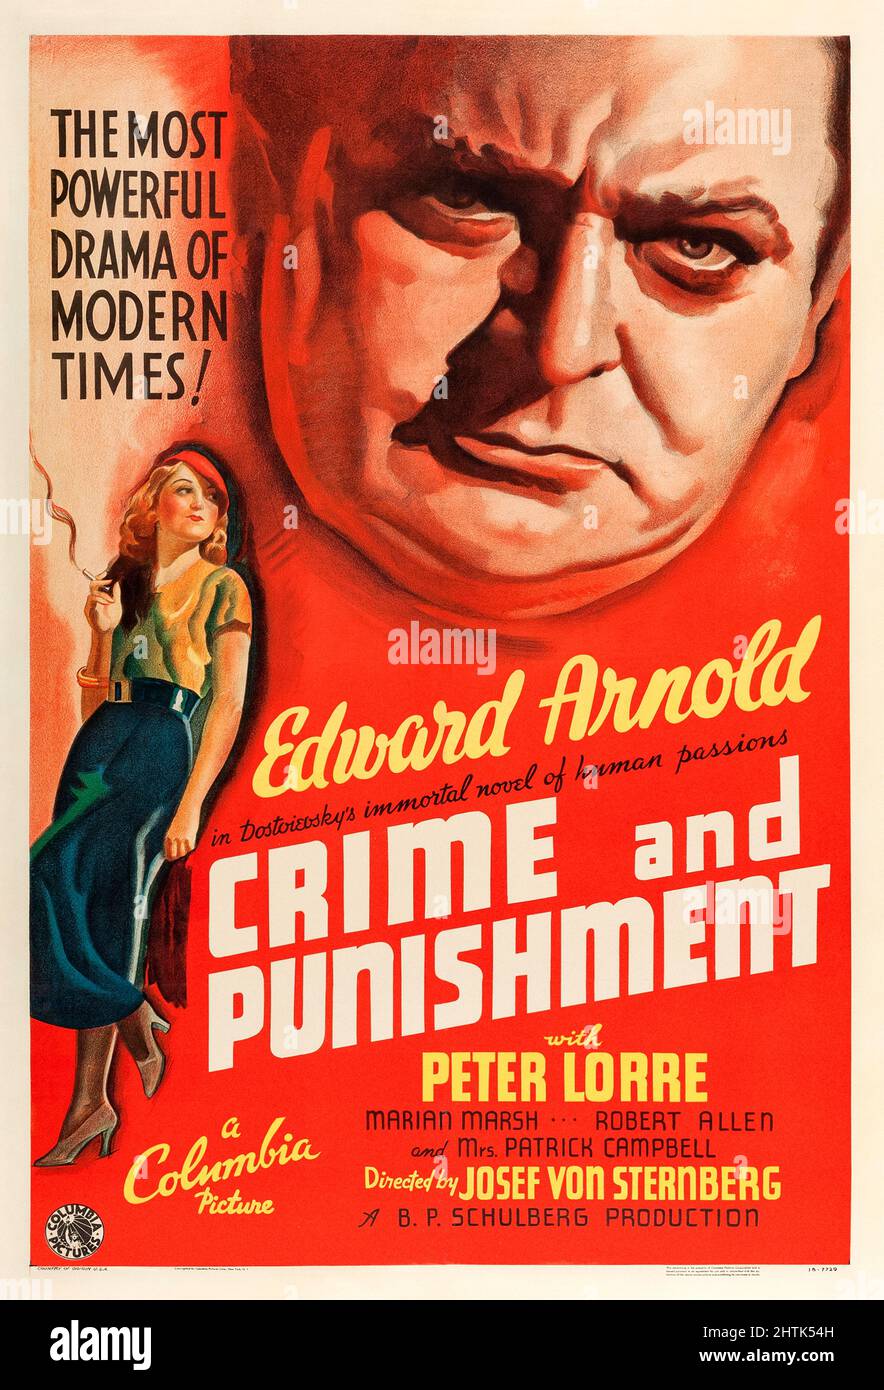 Crime and Punishment (1935) directed by Josef von Sternberg and starring Edward Arnold, Peter Lorre and Marian Marsh. Adaptation of Dostoevsky's novel about a man is haunted by a murder he's committed. Photograph of an original fully restored and linen backed 1935 US one sheet poster. Credit: BFA / Columbia Pictures; Stock Photo